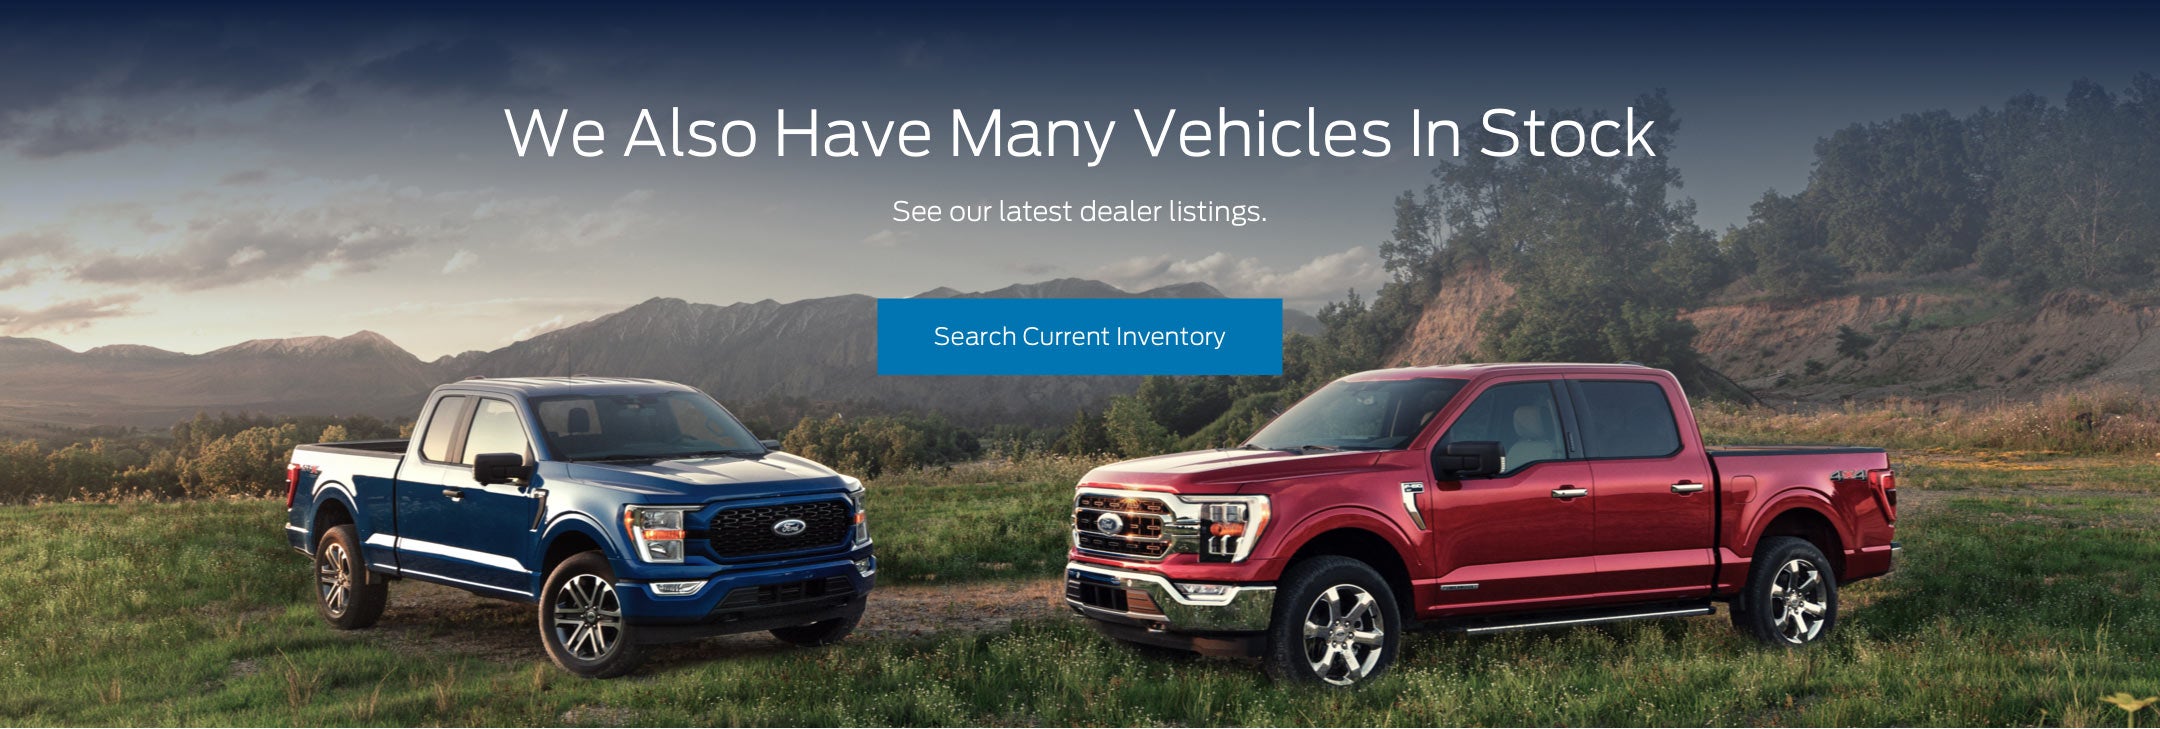 Ford vehicles in stock | Crown Ford Inc in Lynbrook NY